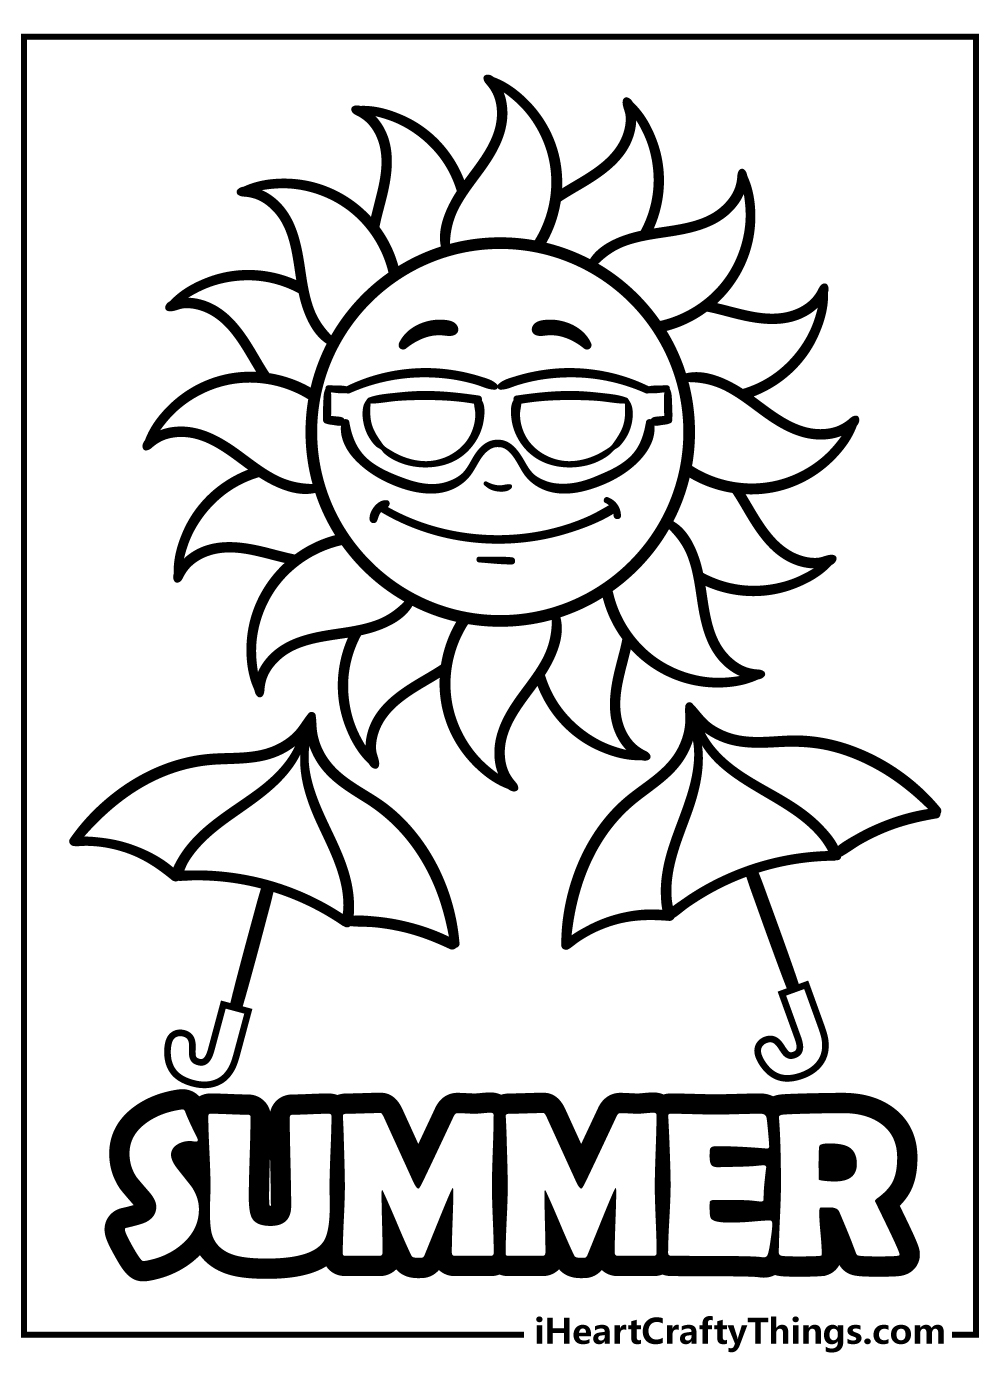 Summer Coloring Book for adults free download